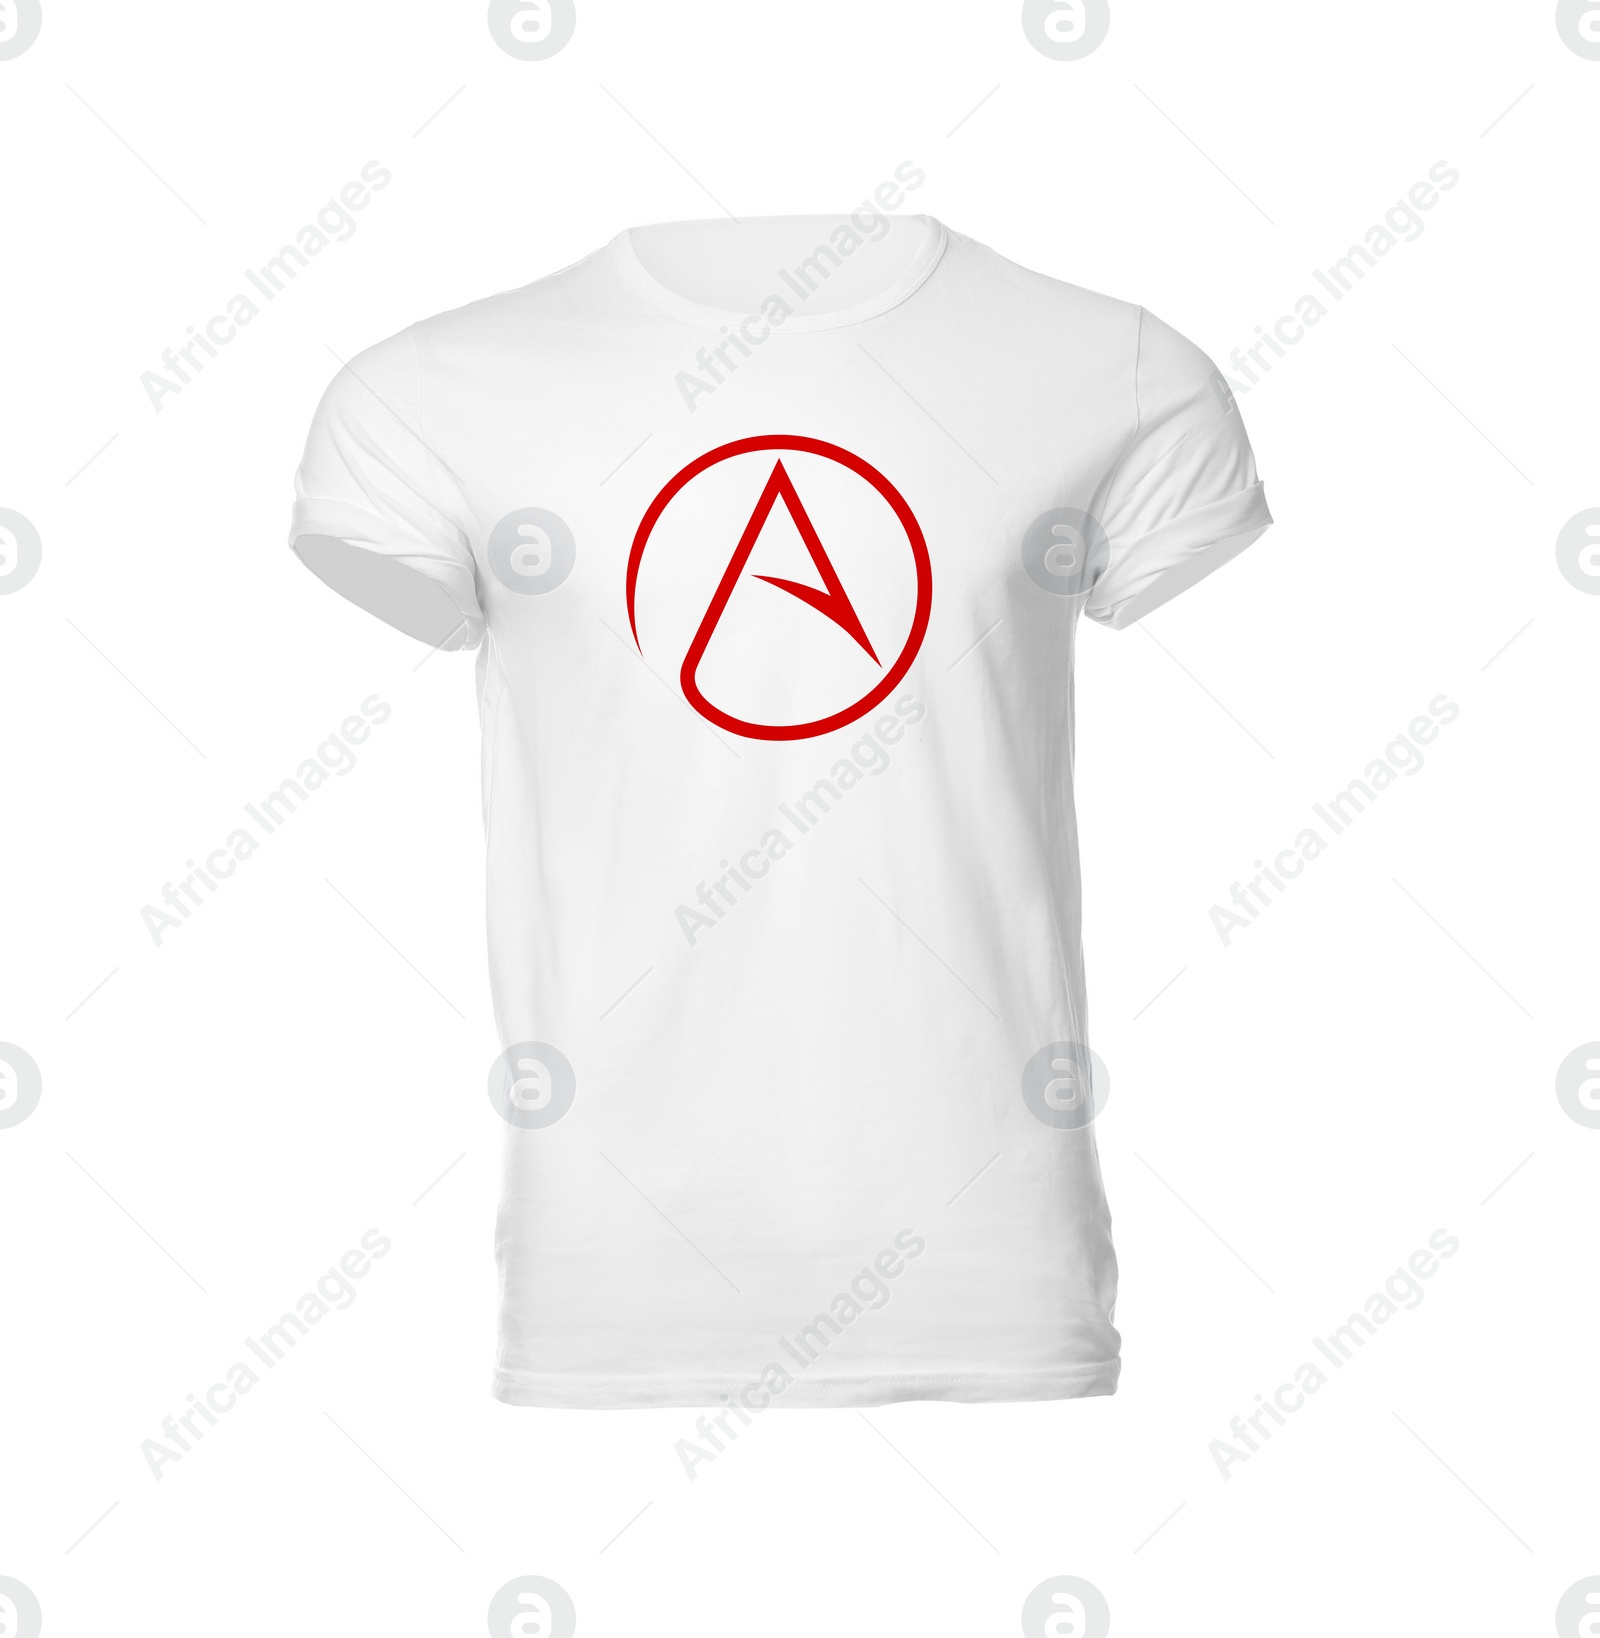 Image of Stylish t-shirt with atheism sign isolated on white